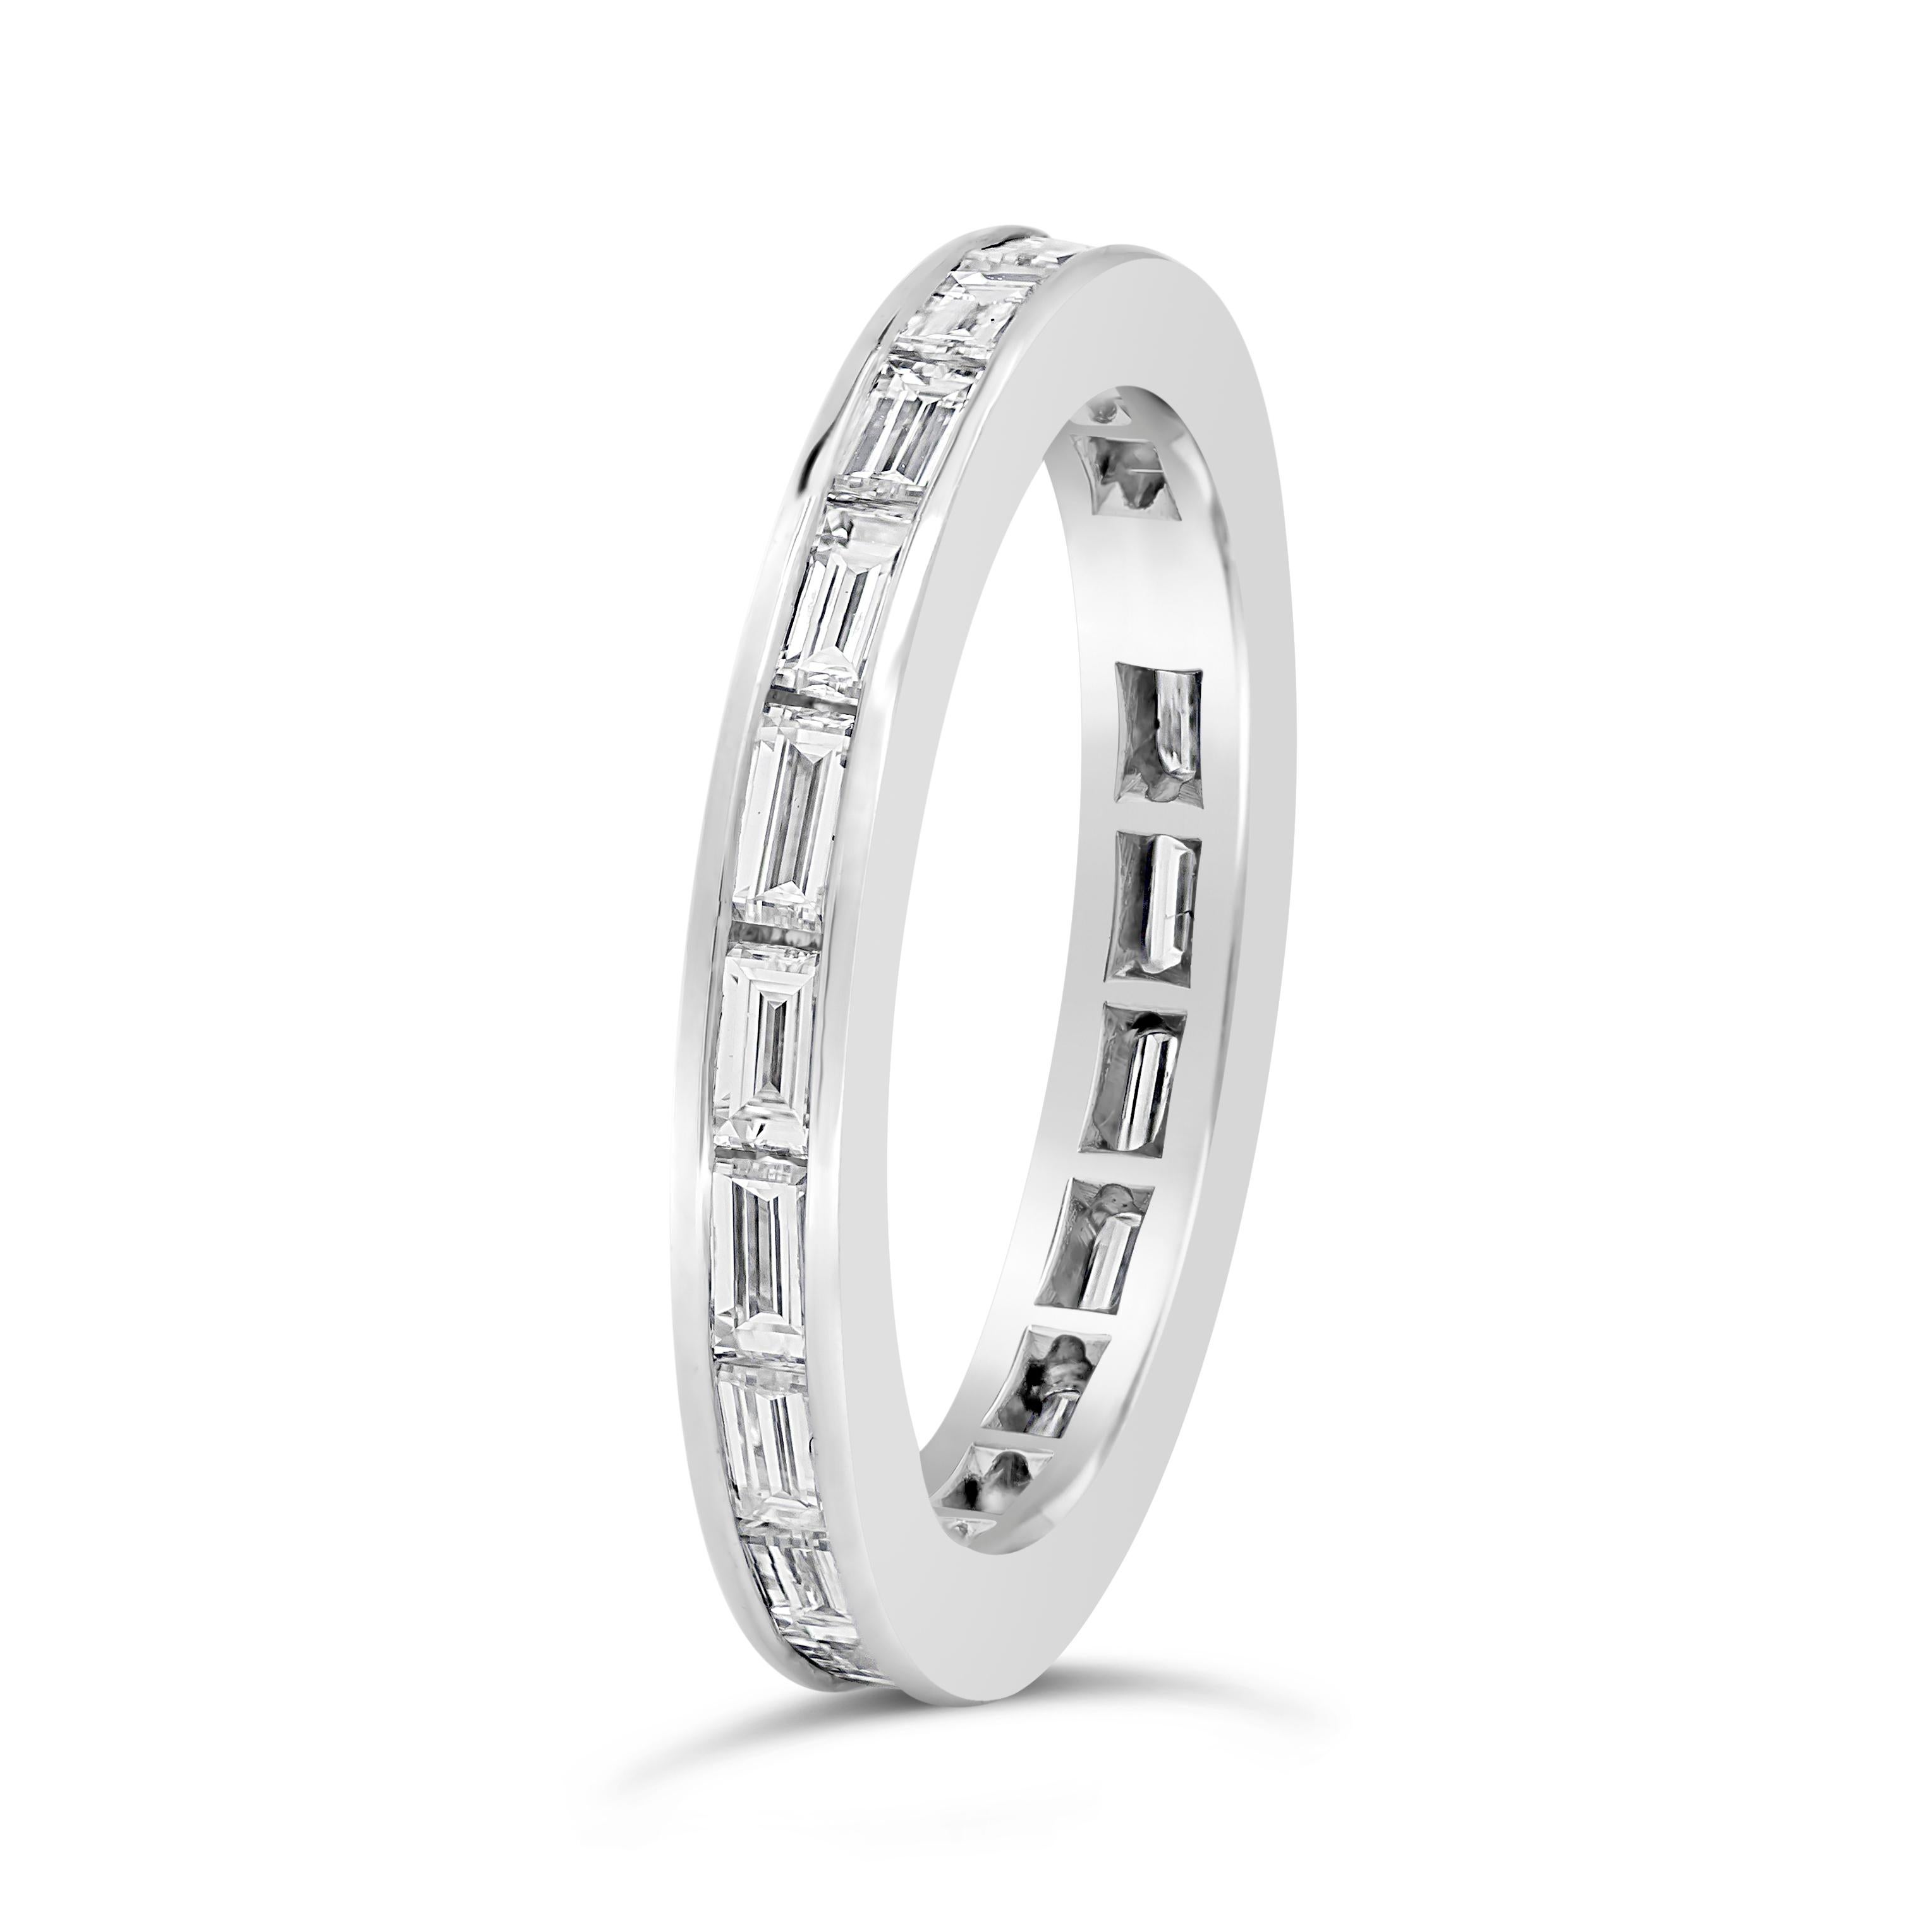 A unique and chic wedding band design showcasing baguette diamonds weighing 0.90 carats total. Elegantly set in platinum. Size 6.5 US.

